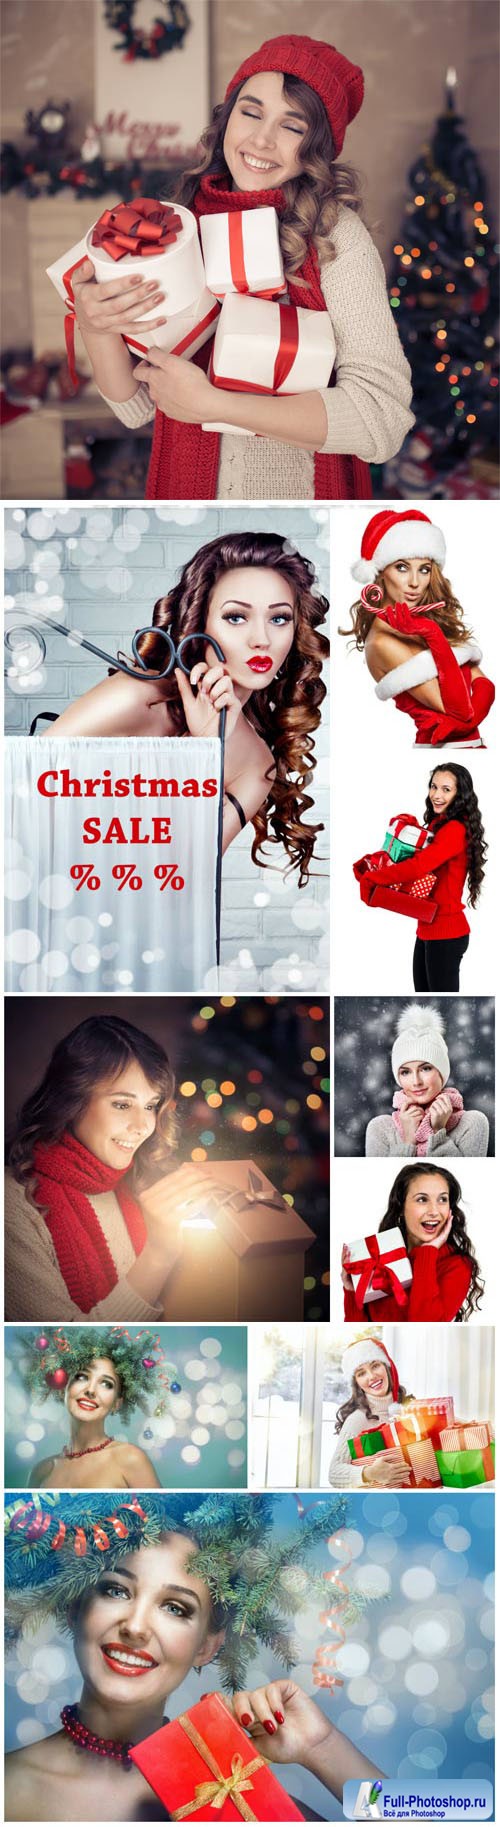 New Year and Christmas stock photos 44